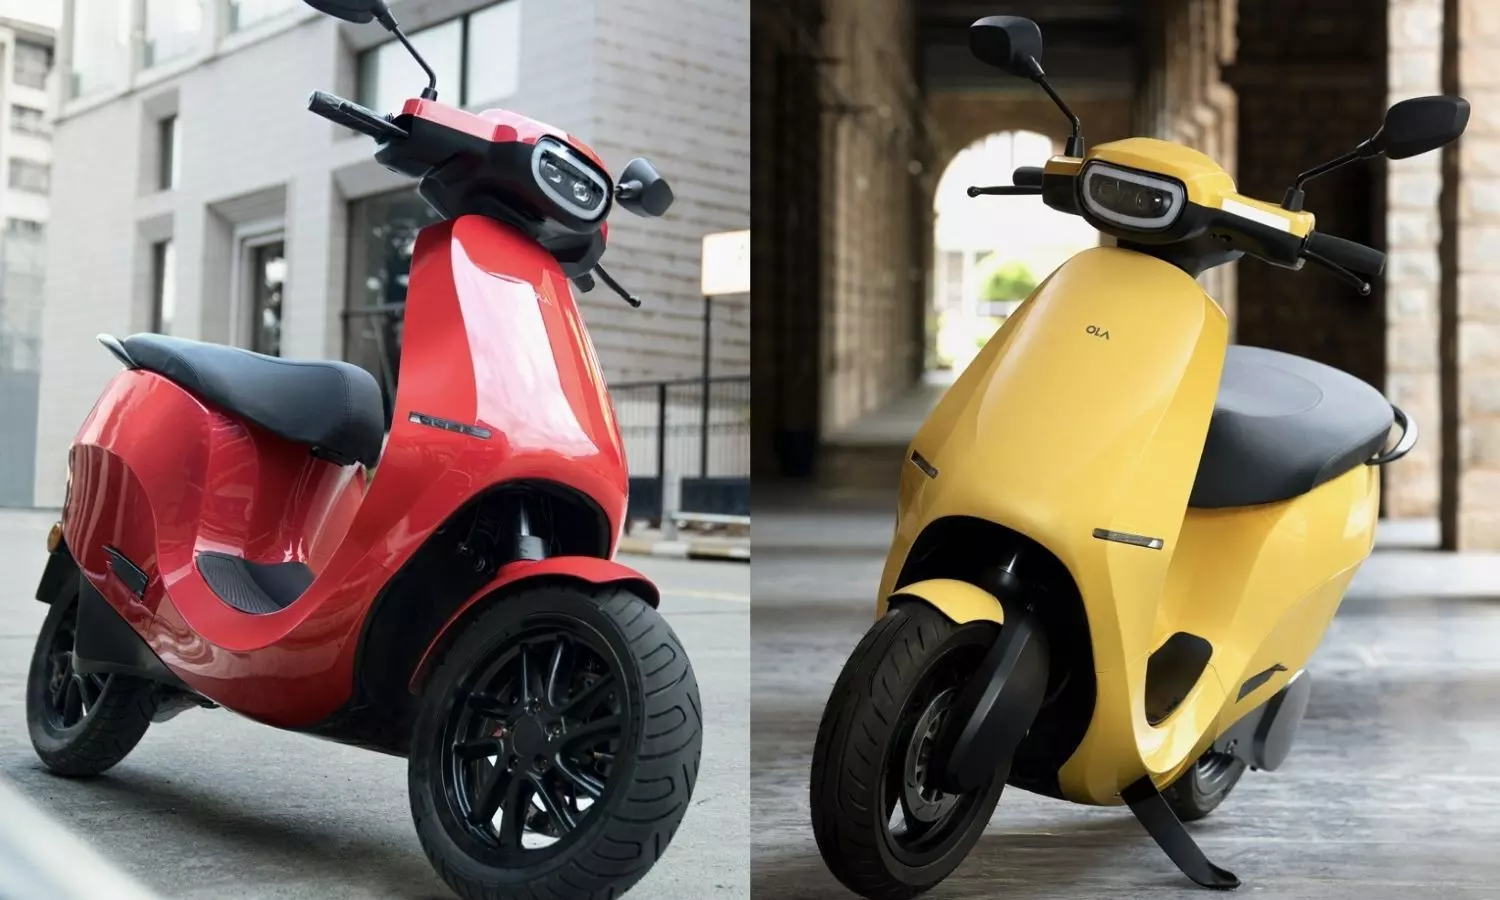 Ola Electric scooter in red and yellow